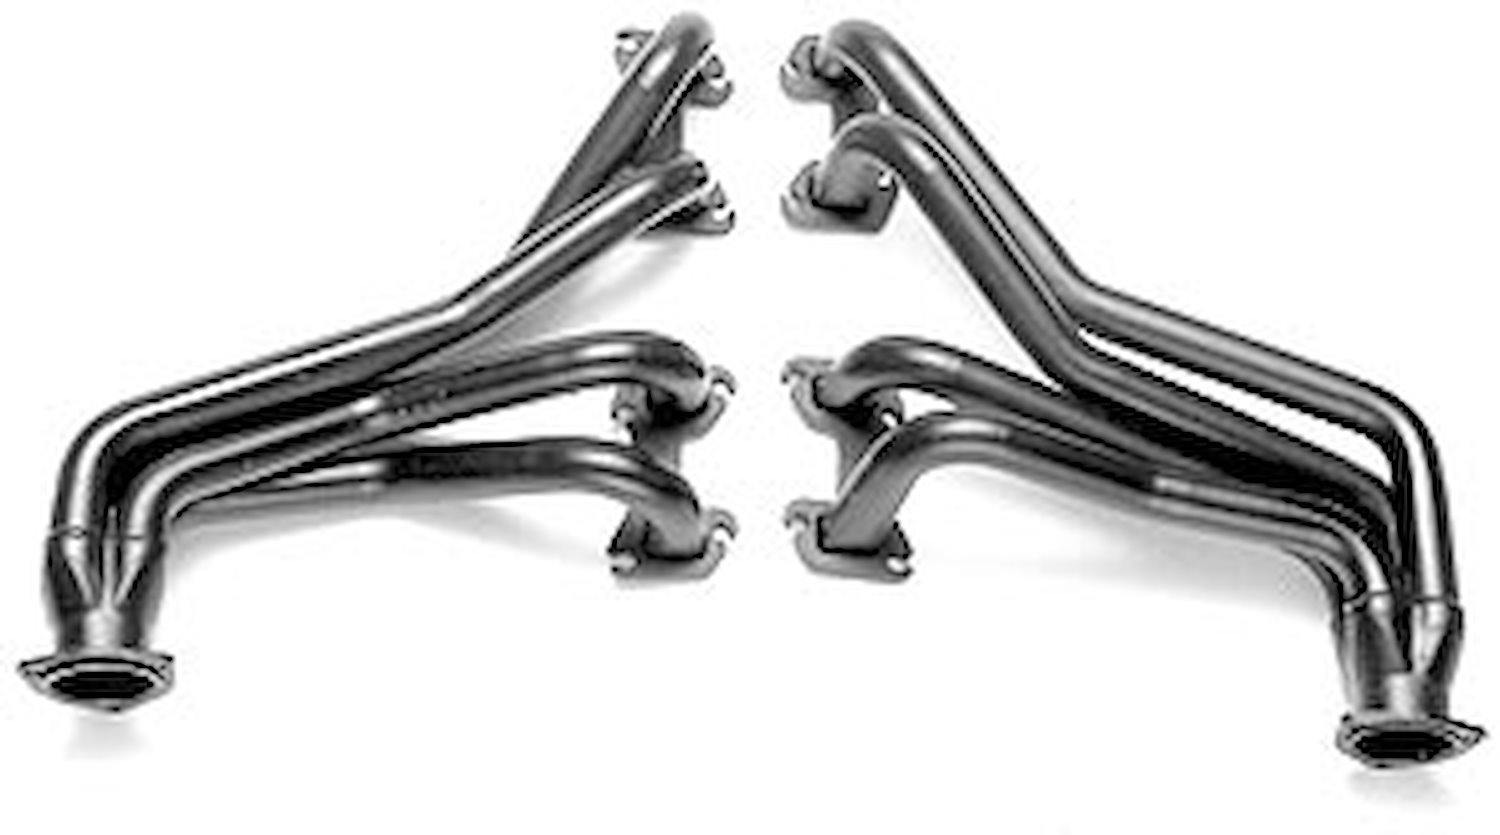 Standard Duty Uncoated Headers for 1970-74 Range Rover 215